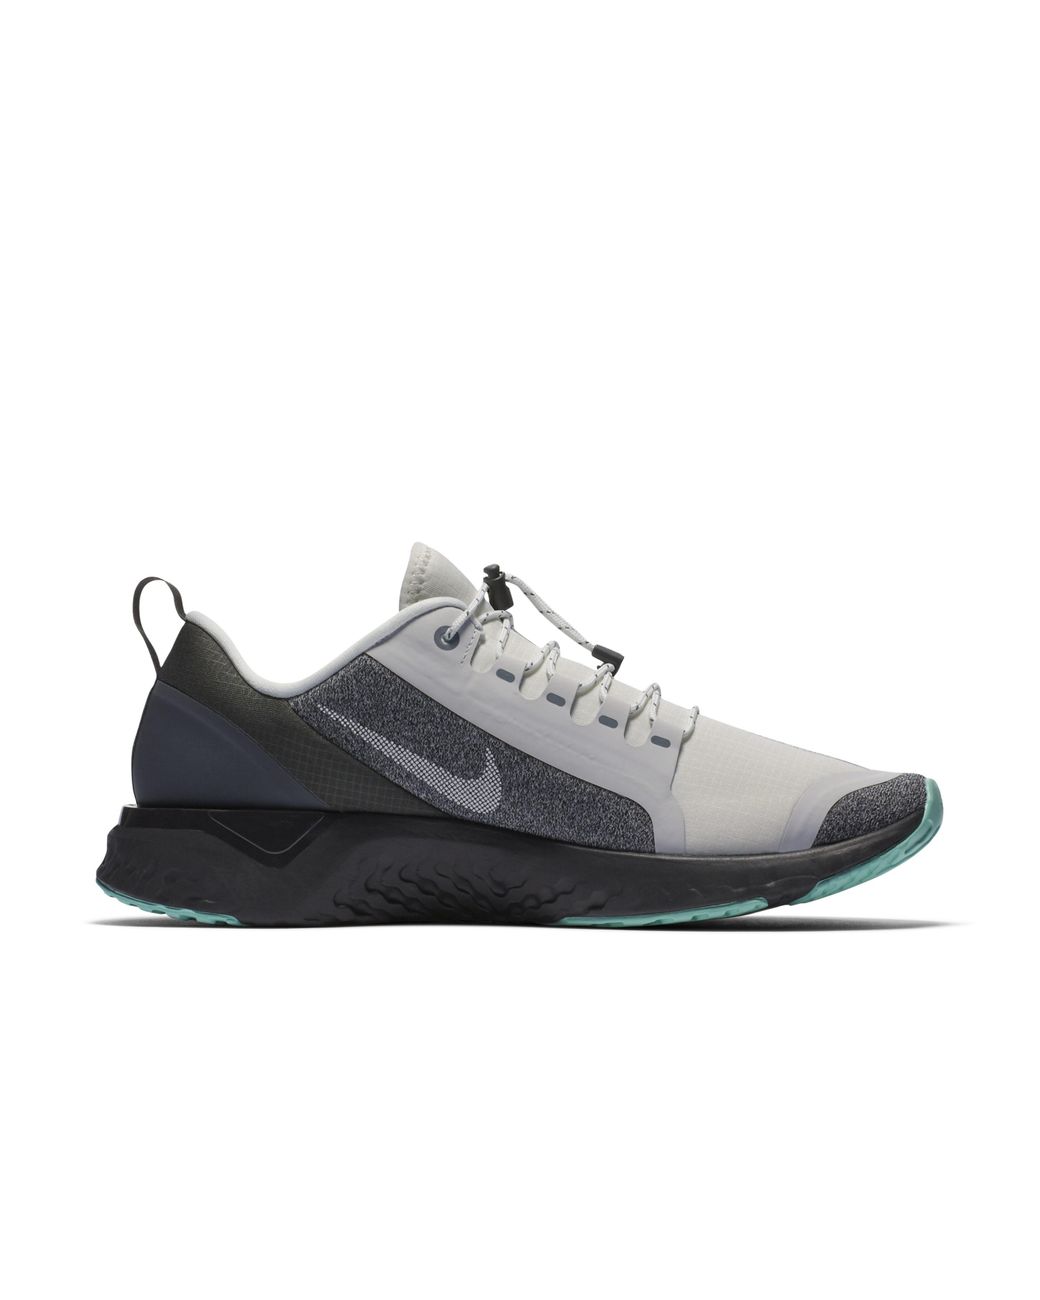 Odyssey React Shield Water-repellent Running Shoe White | Lyst UK